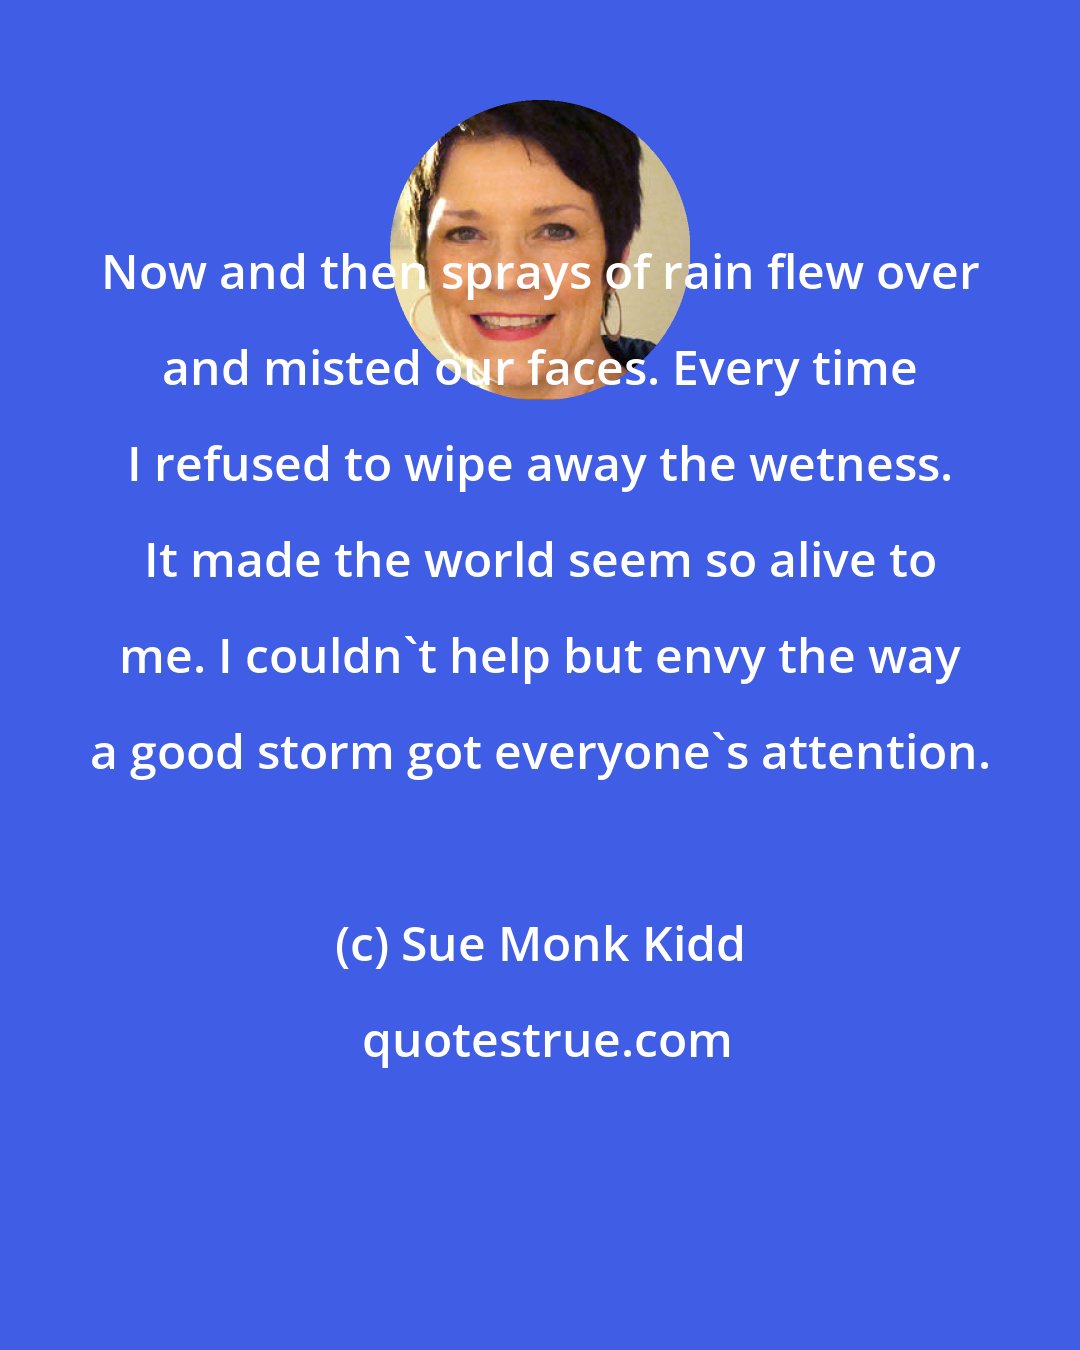 Sue Monk Kidd: Now and then sprays of rain flew over and misted our faces. Every time I refused to wipe away the wetness. It made the world seem so alive to me. I couldn't help but envy the way a good storm got everyone's attention.